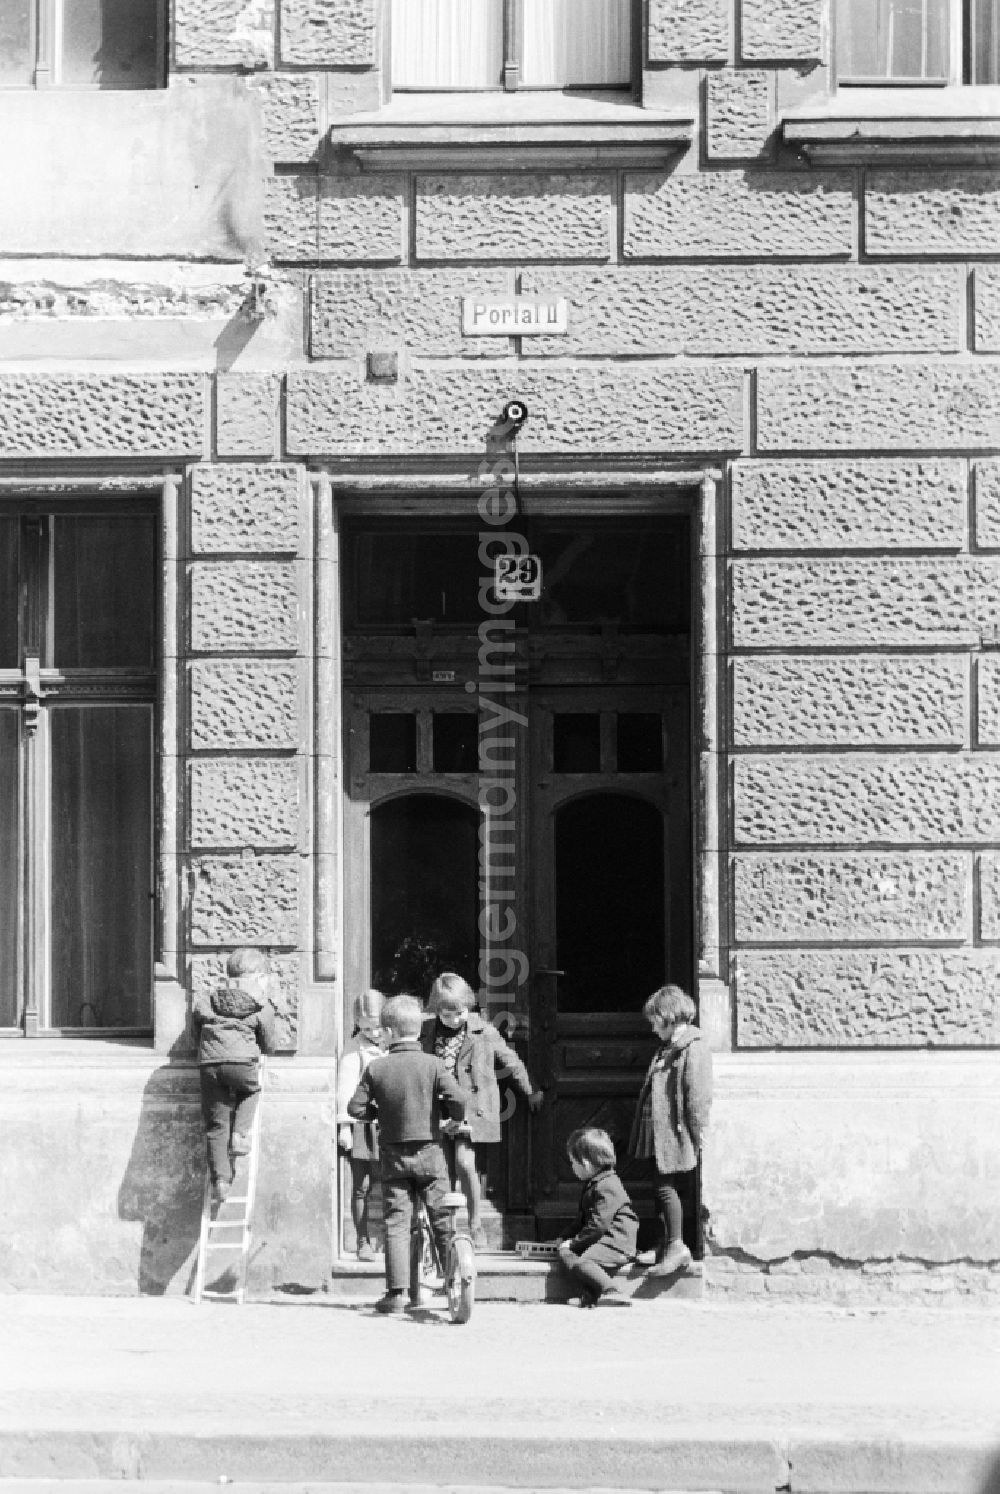 GDR picture archive: Berlin - Children are playing in front of the entrance of an old building in Berlin, the former capital of the GDR, German Democratic Republic